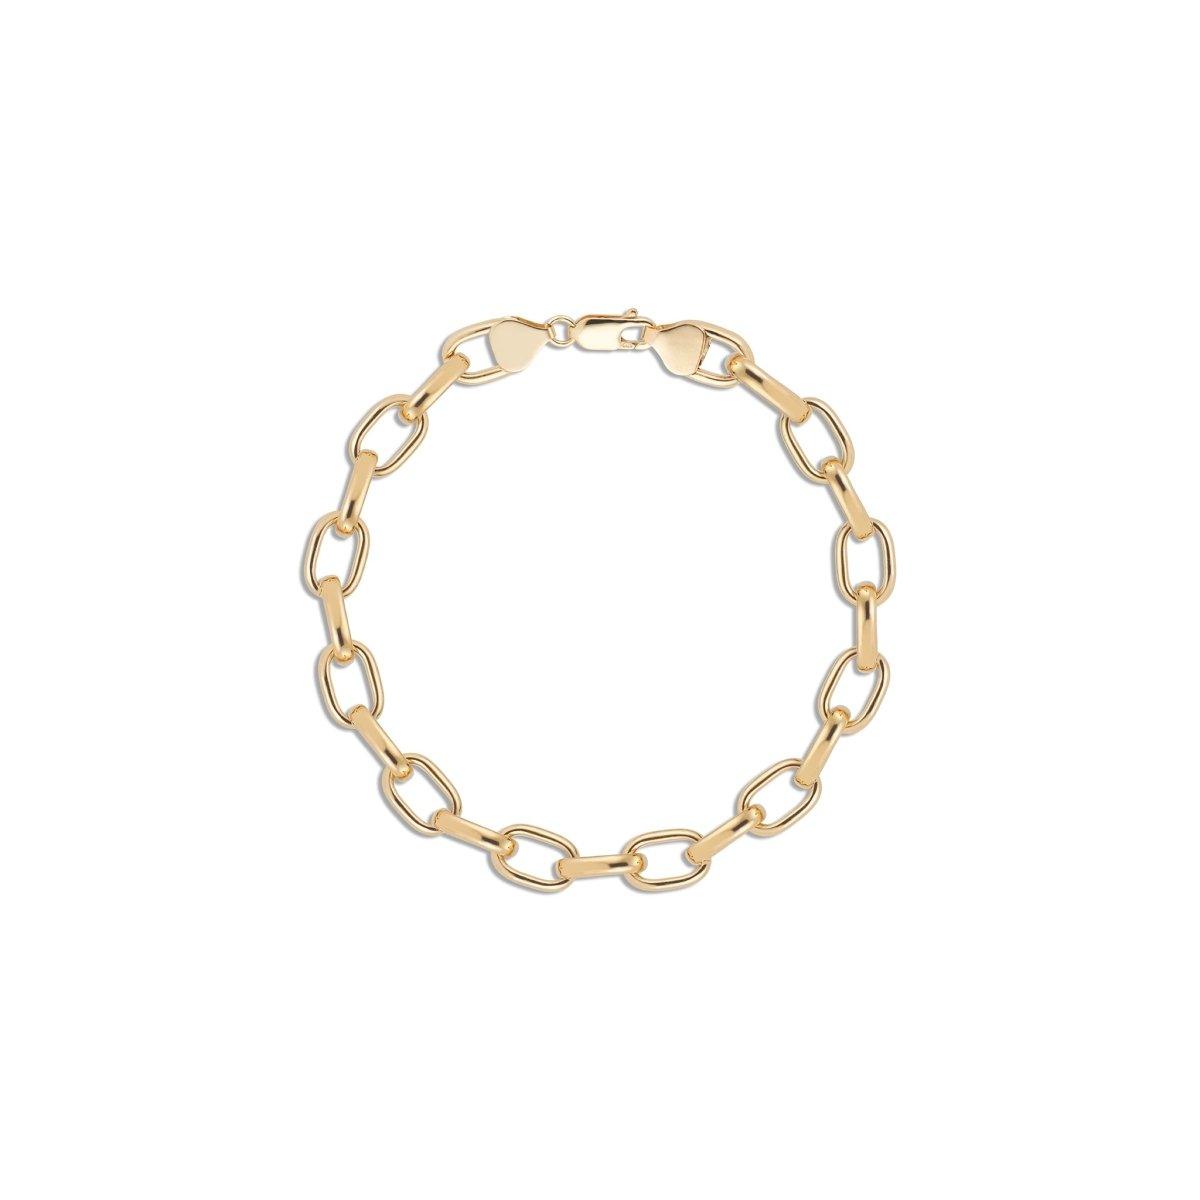 Chained Link Bracelet - Nataly Aponte